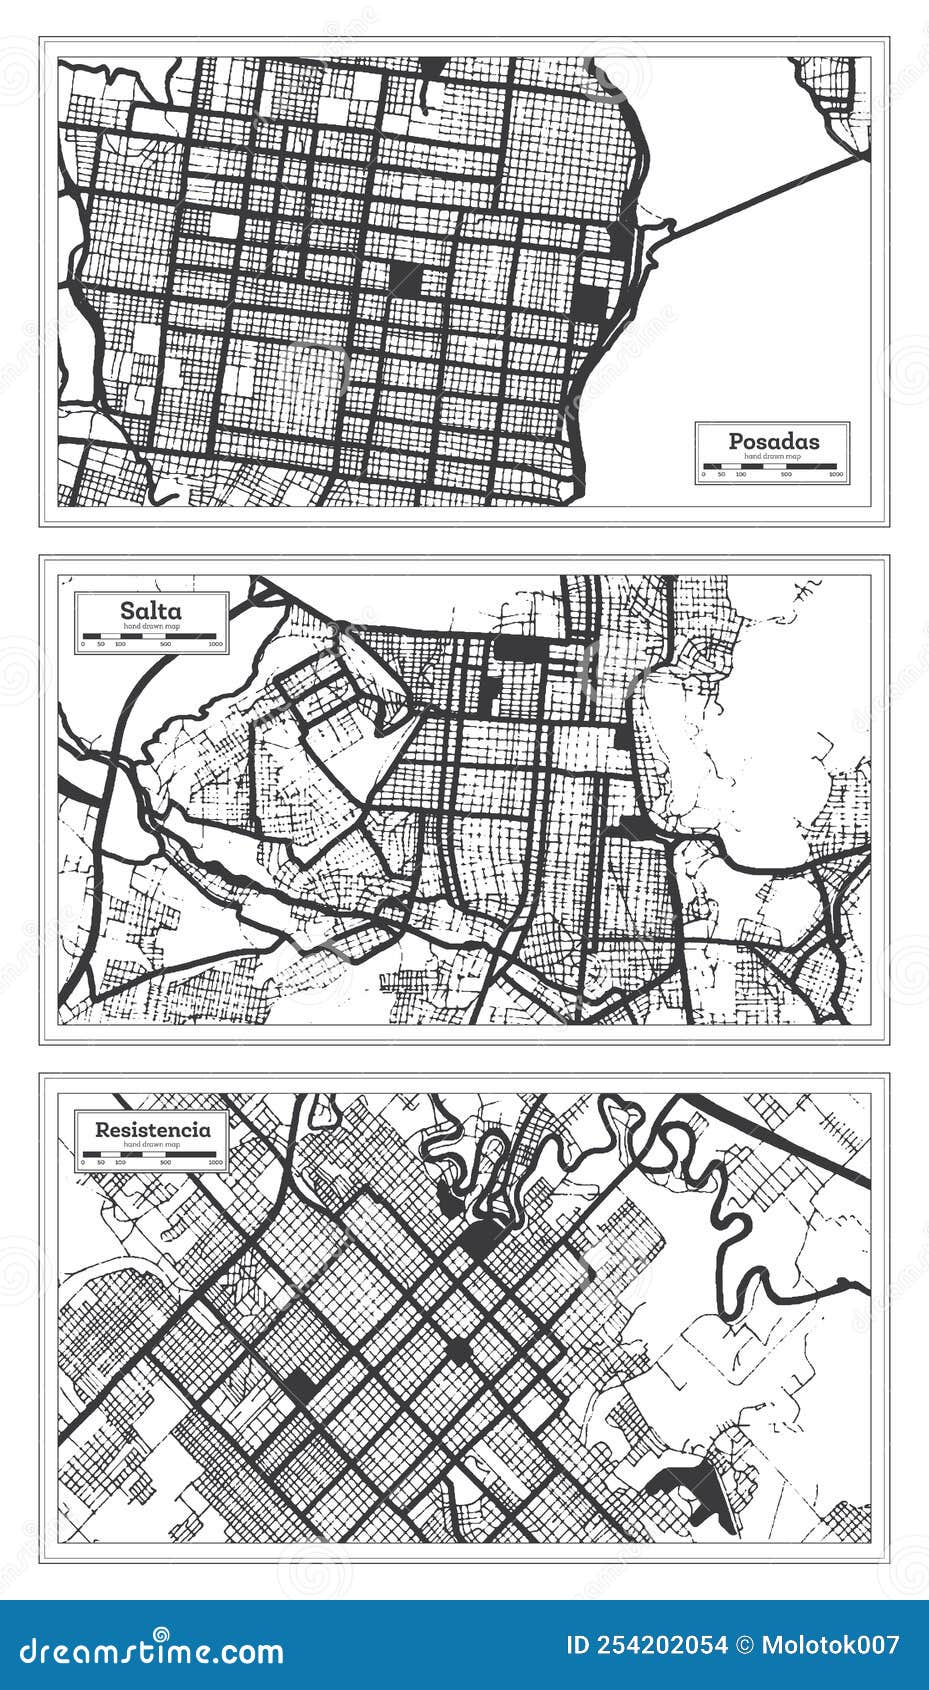 salta, resistencia and posadas argentina city map set in black and white color